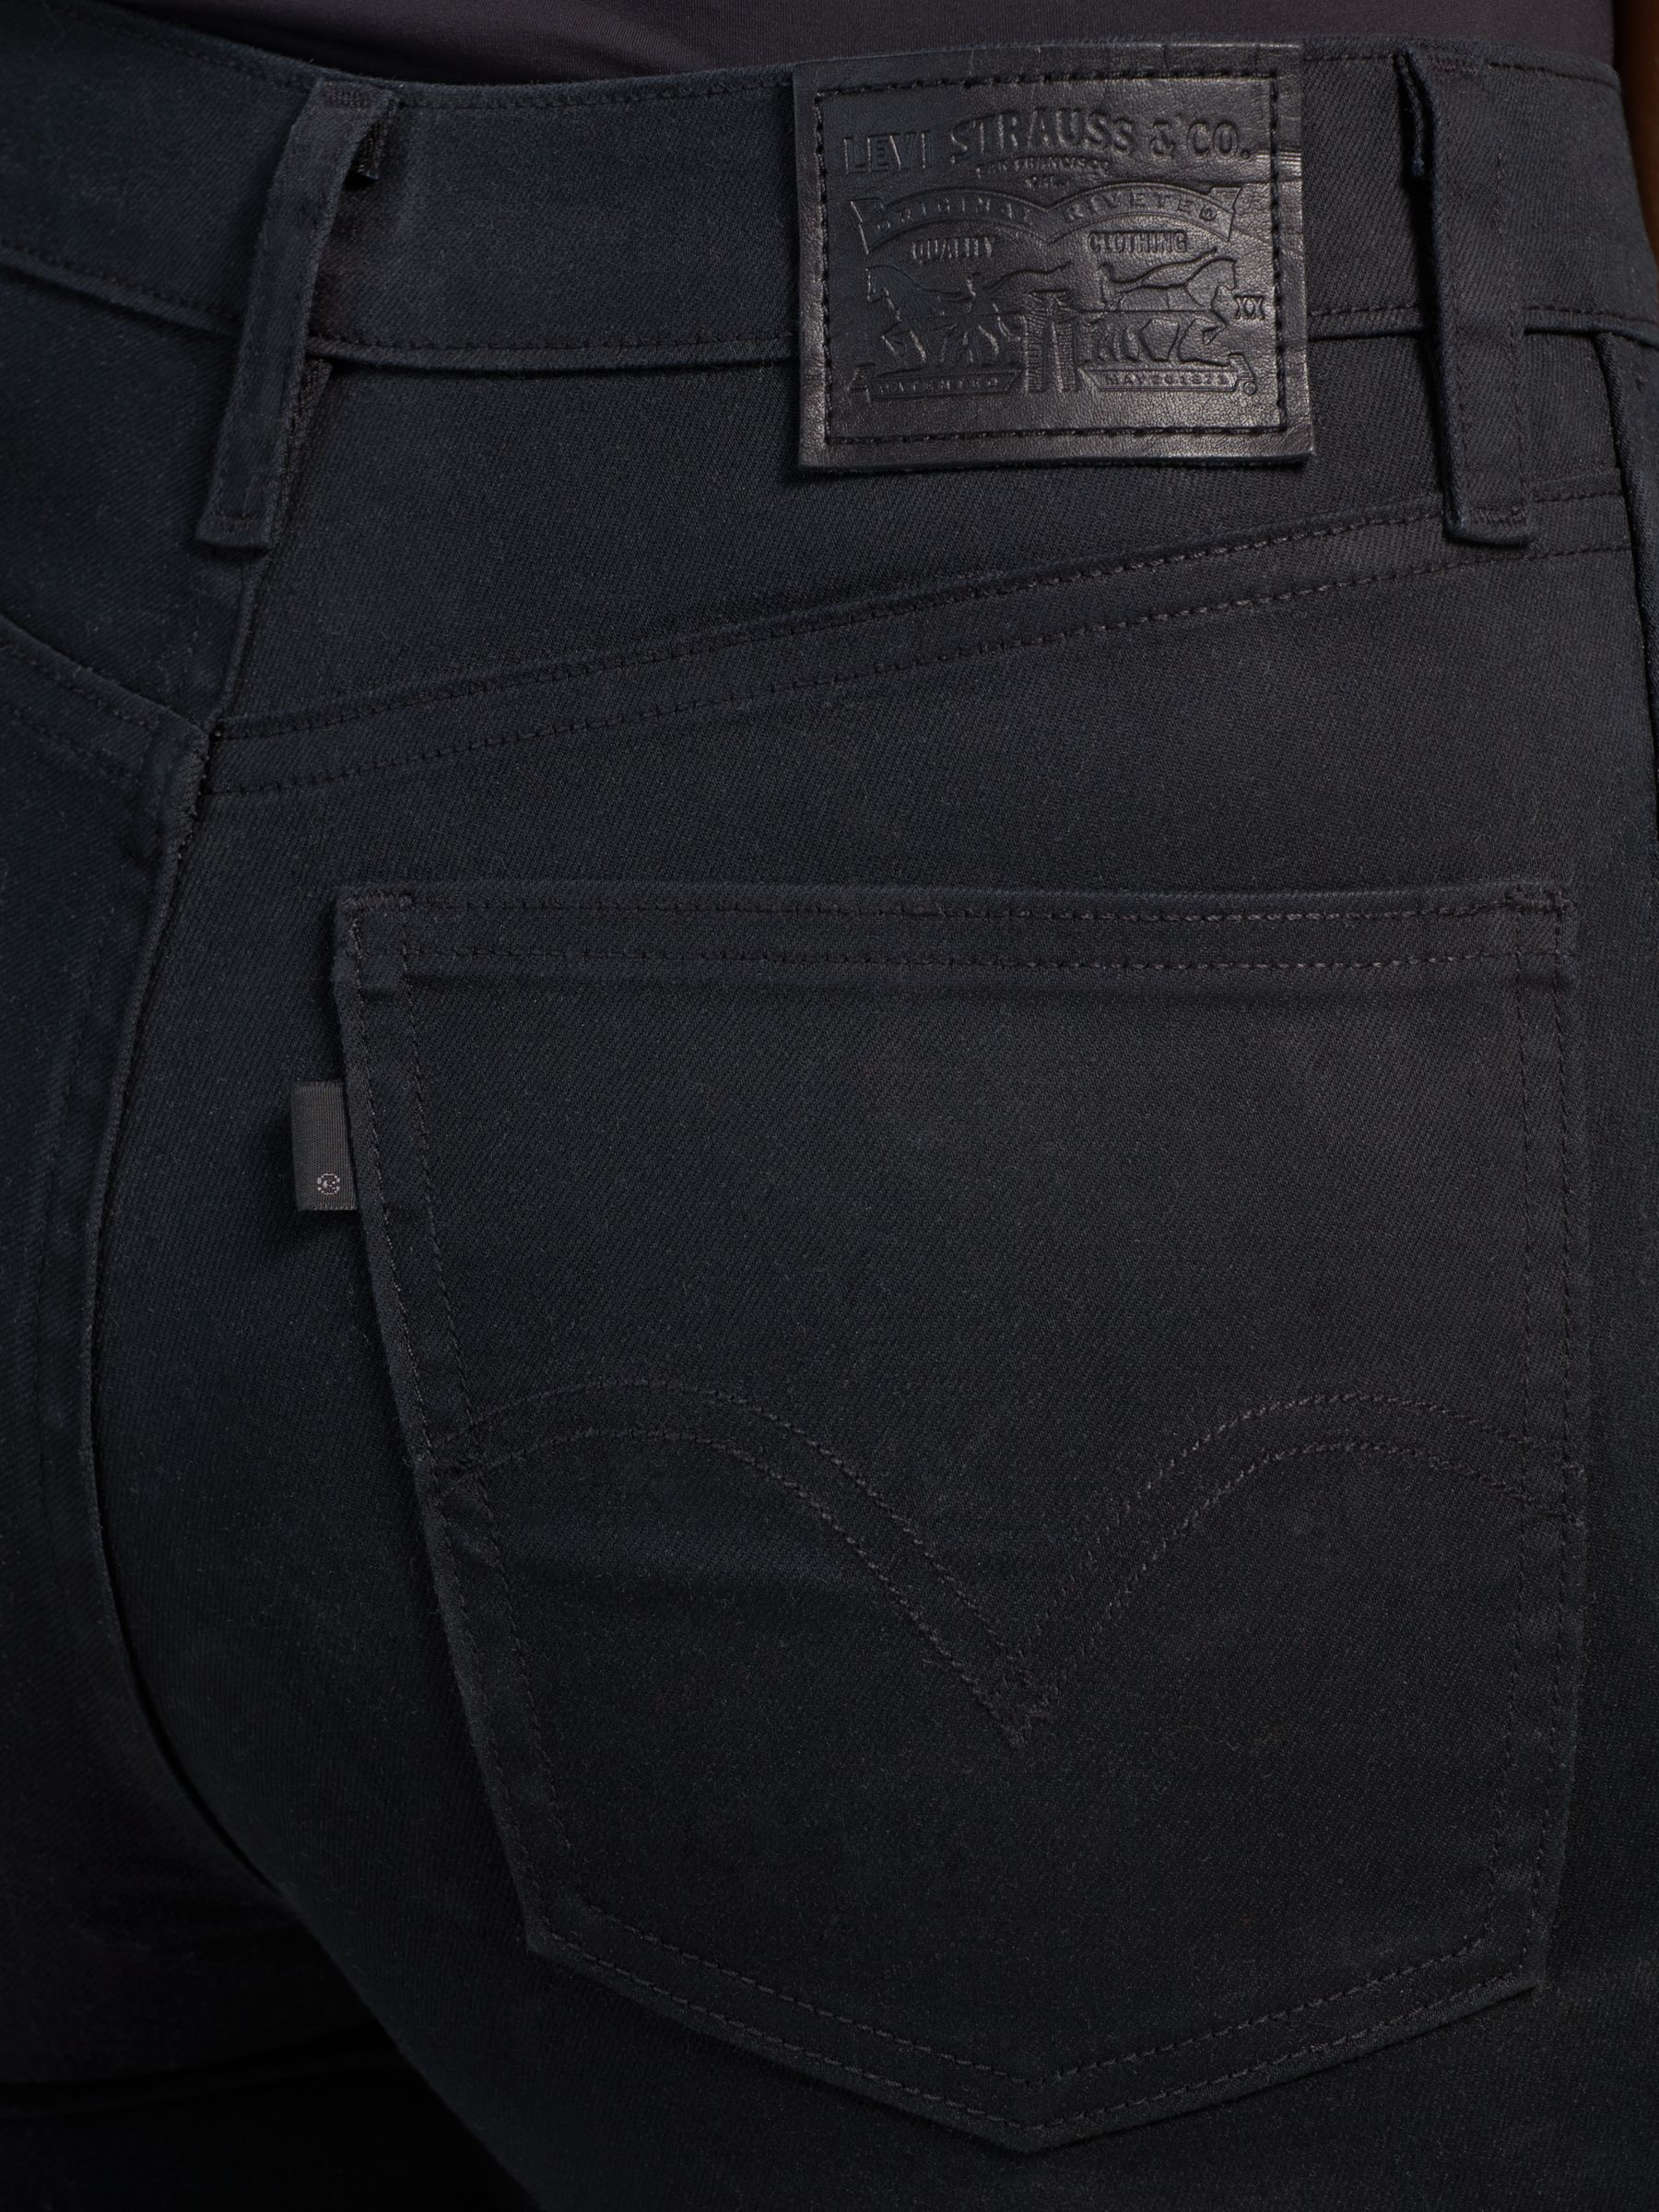 levis coated jeans